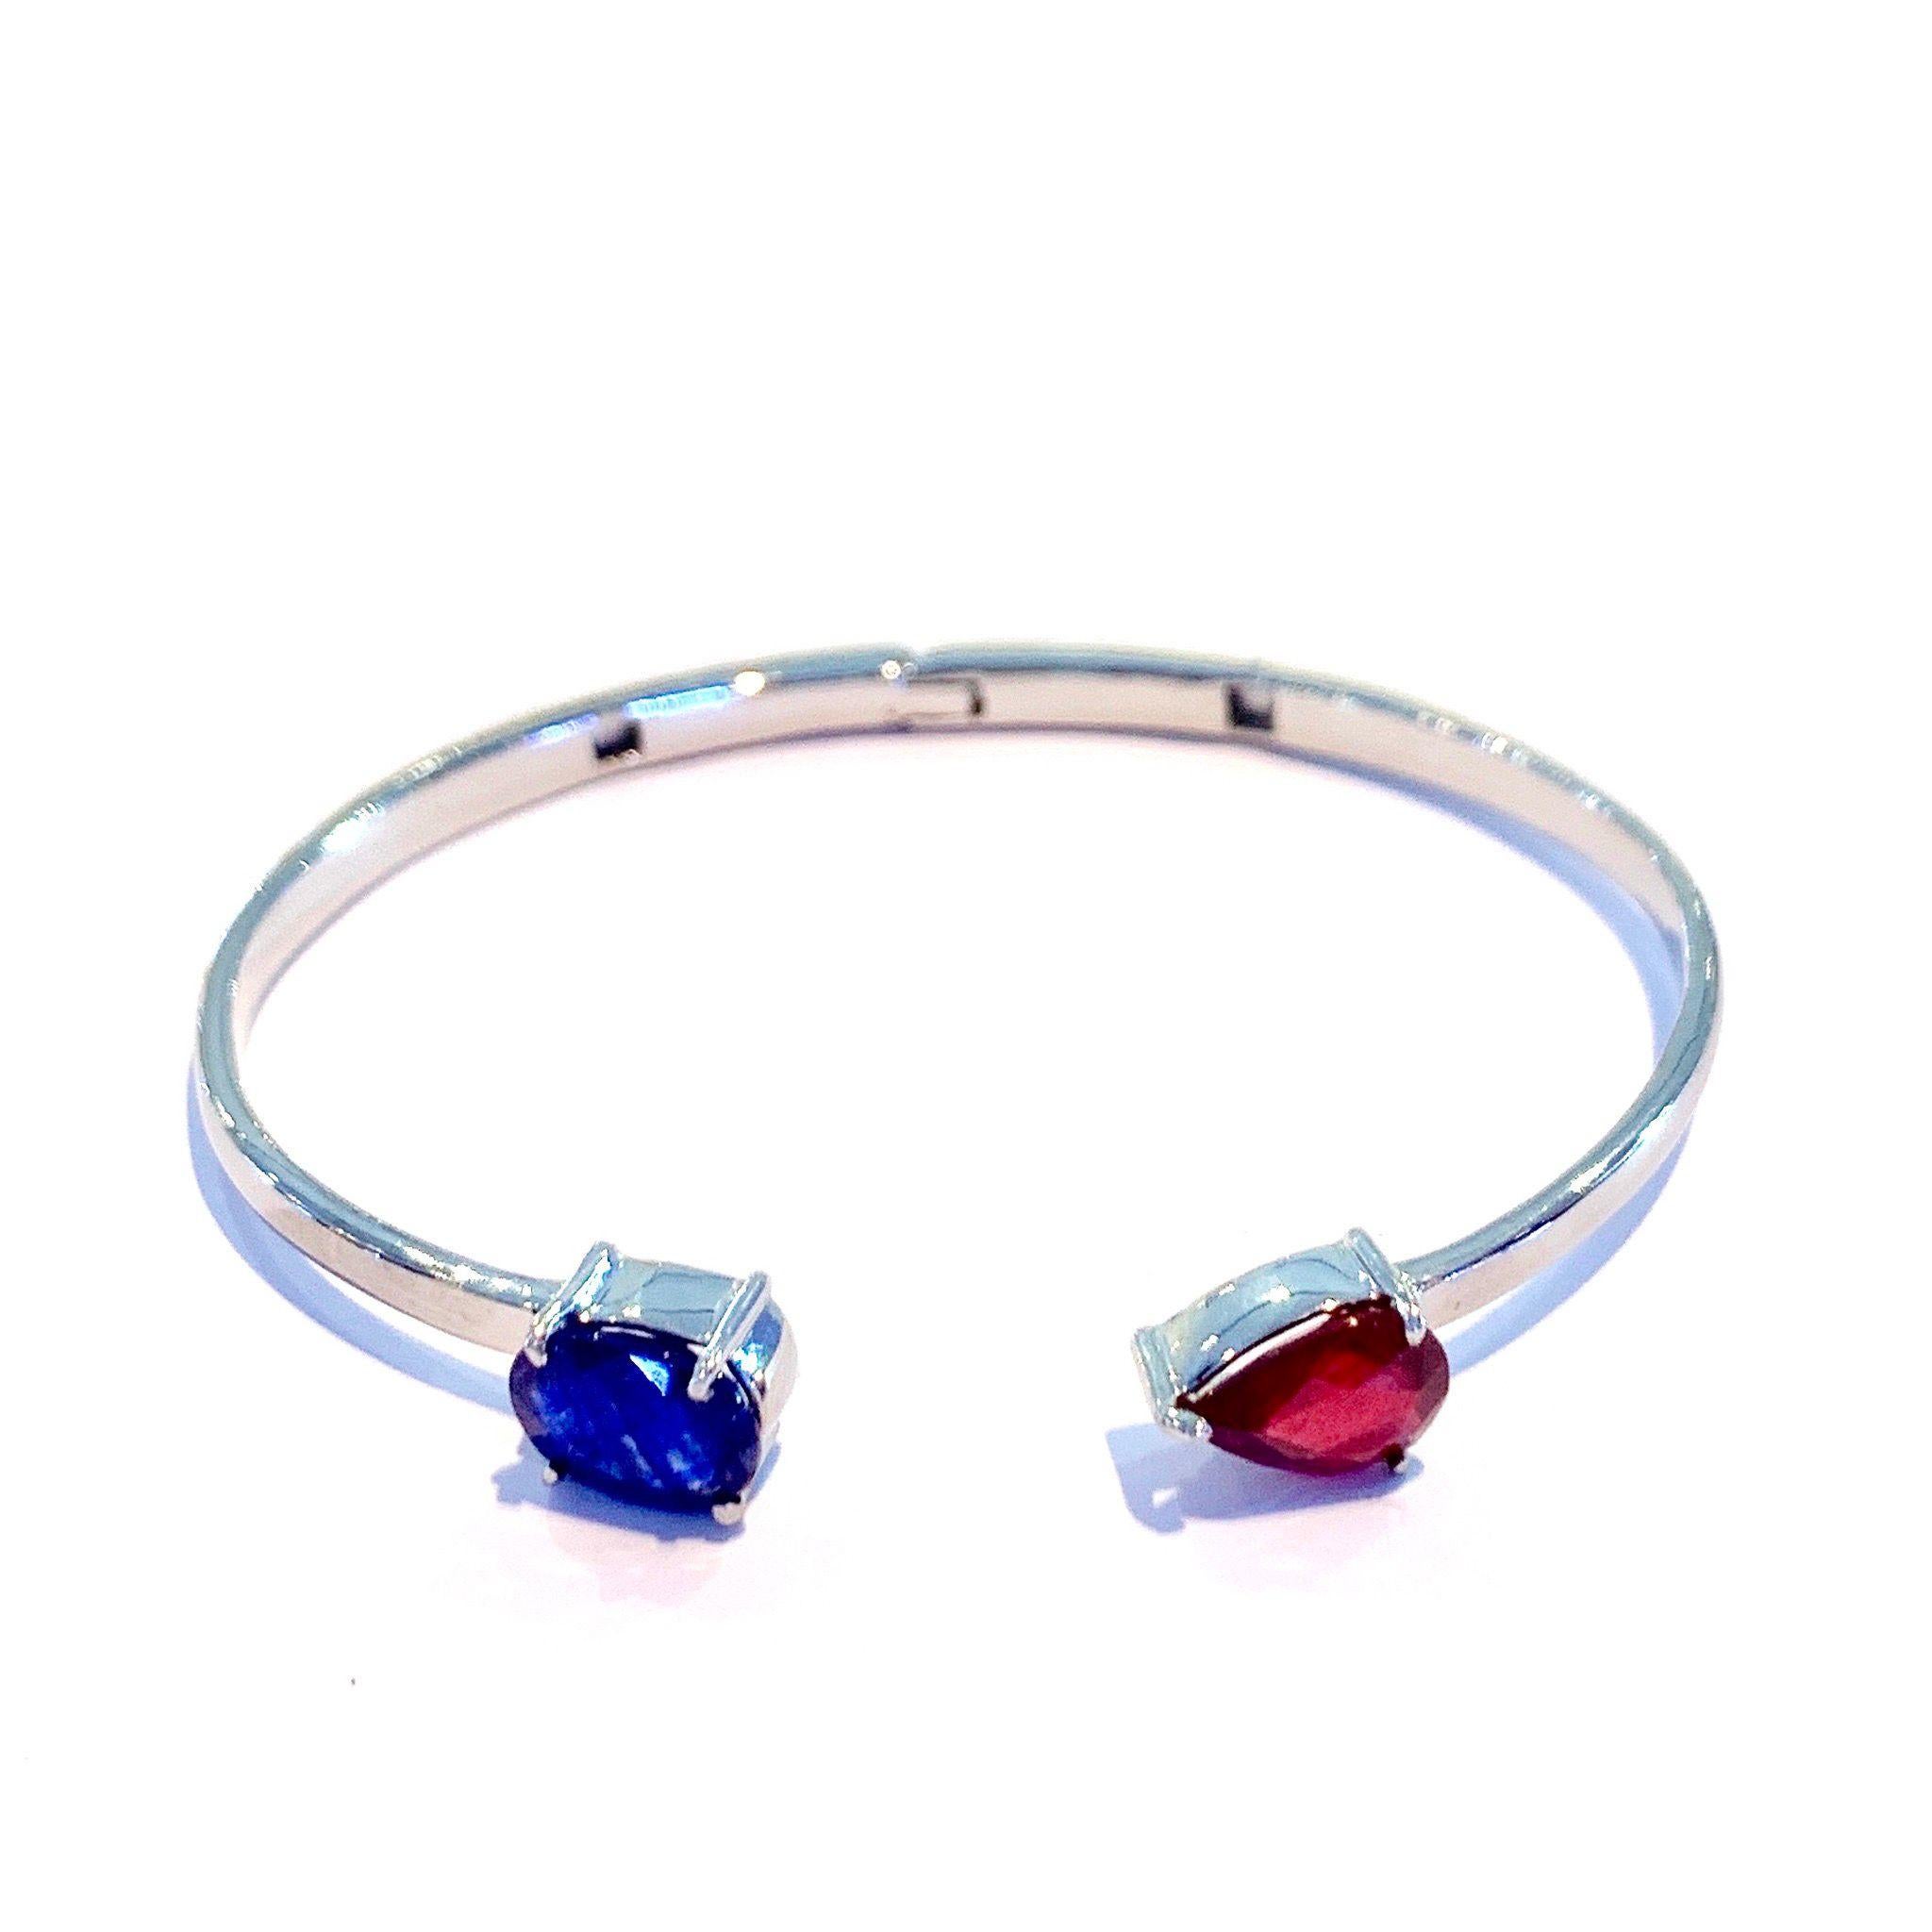 Bochic Silver & White Gold Plating Bangle With Red Ruby and Blue Sapphire 
Natural Blue sapphire 
Sri Lankan 
Oval shape 
4 carats 
Natural Red Ruby 
Pear shape 
3.5 carat 
Silver with 18K White gold plating 
Chic and timeless 
Perfect for stacks